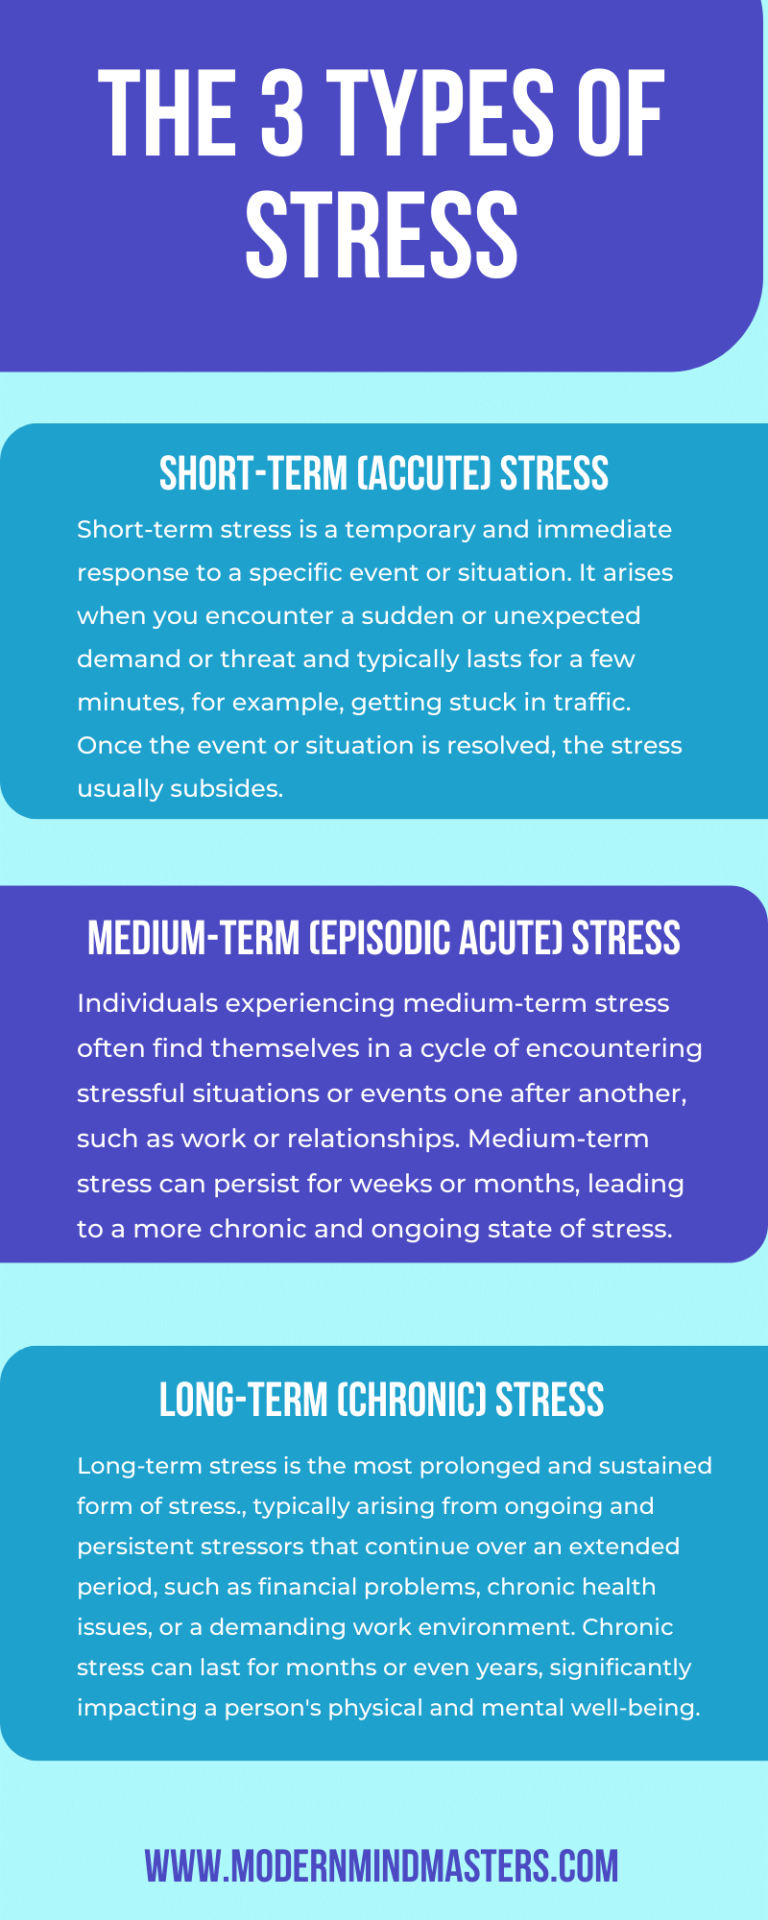 The 3 Types of Stress: Acute (short), episodic accute (medium), and chronic (long-term).